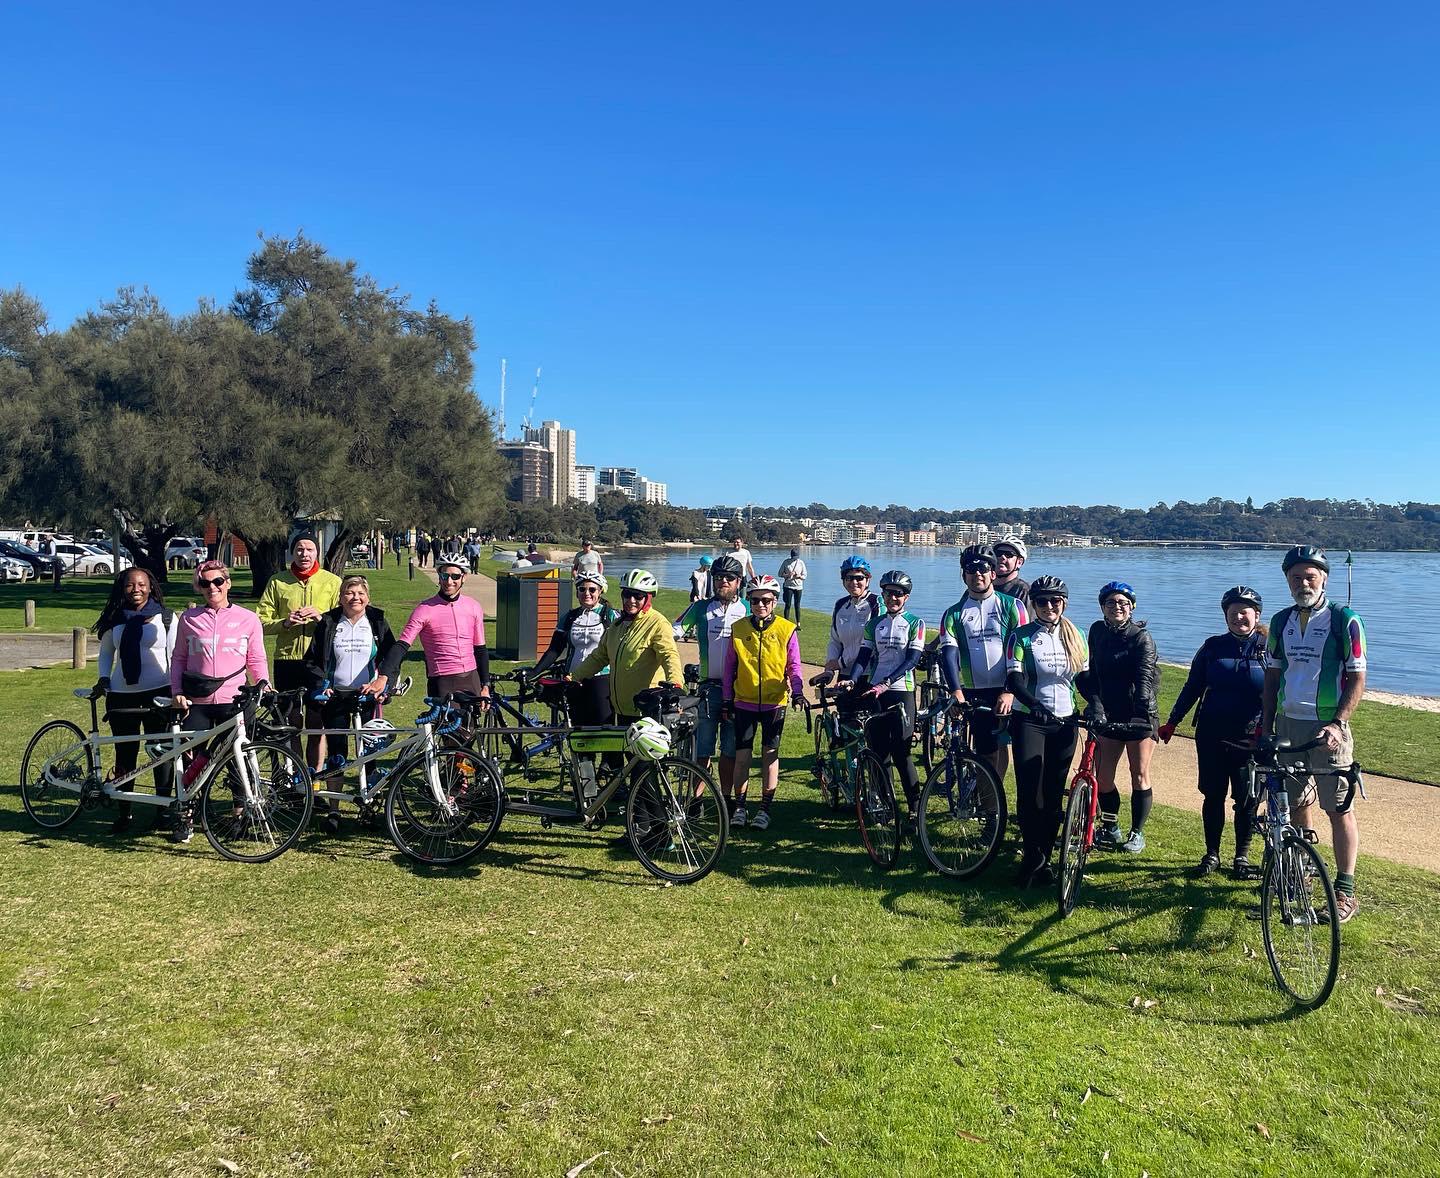 Our biggest recreational ride for the year was in August, where we had 19 riders with 9 tandems and a single bike. The group photo shows us stopped by the Swan River on a beautiful sunny morning.